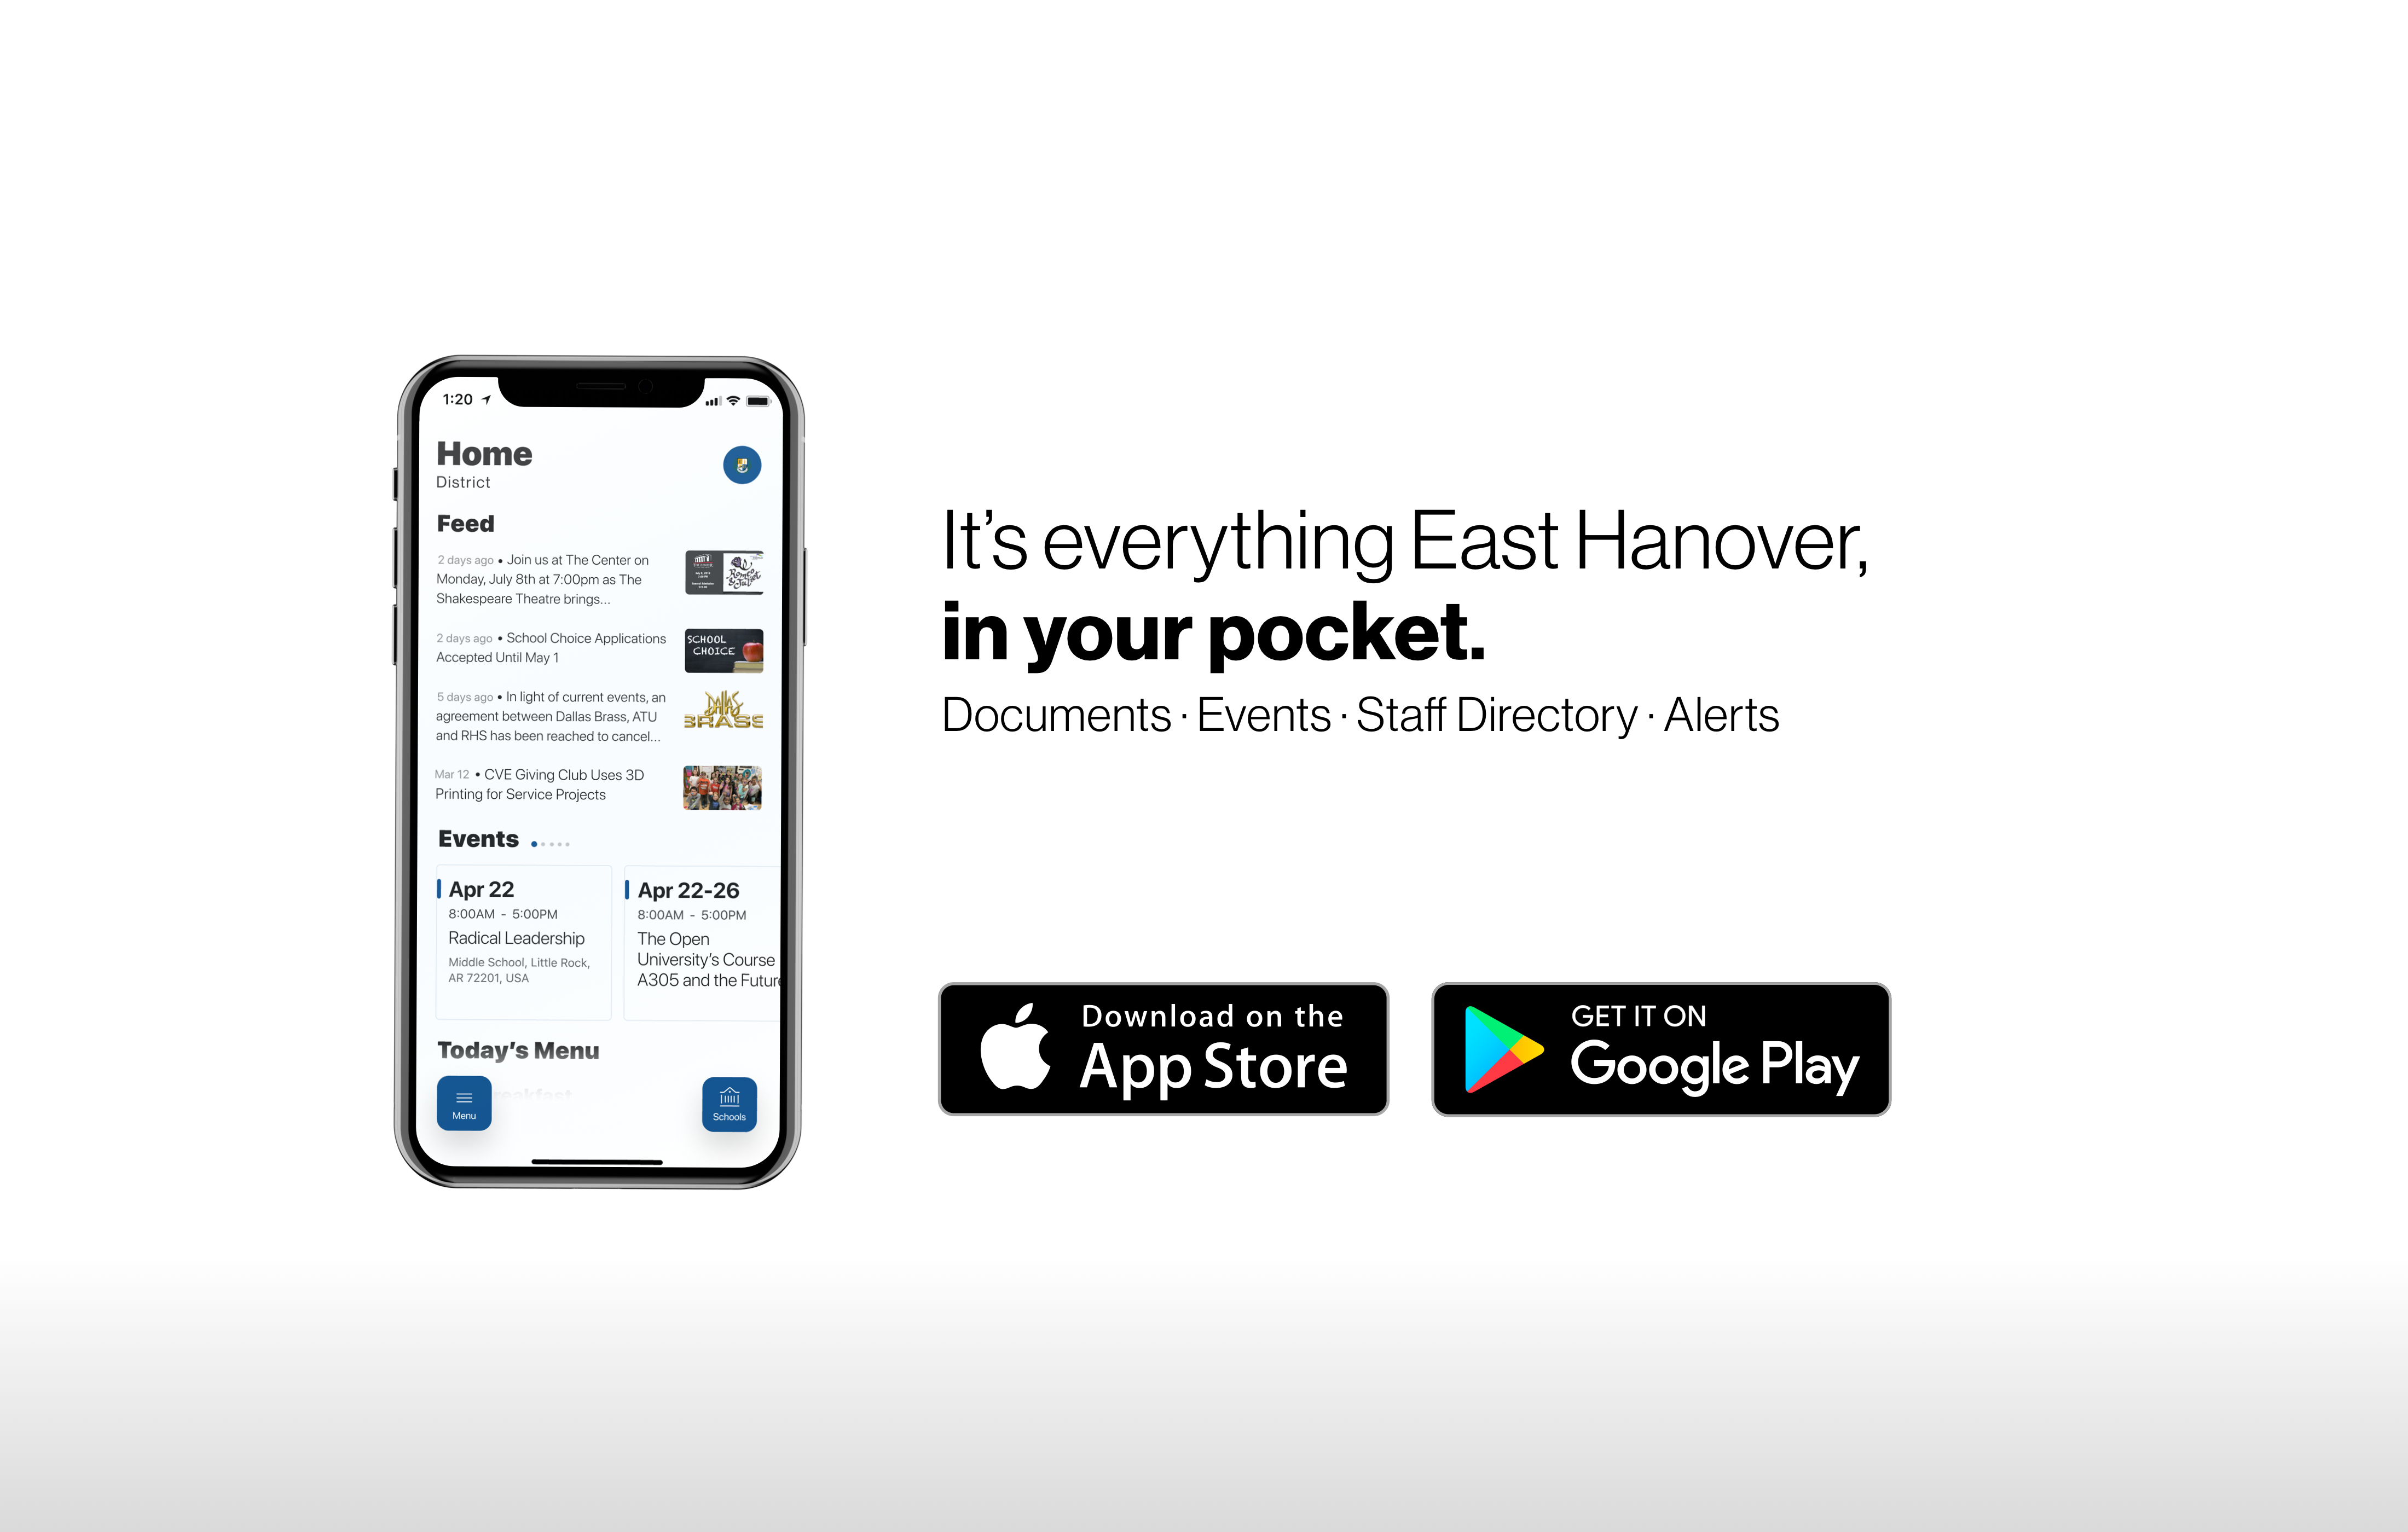 Everything East Hanover in Your Pocket